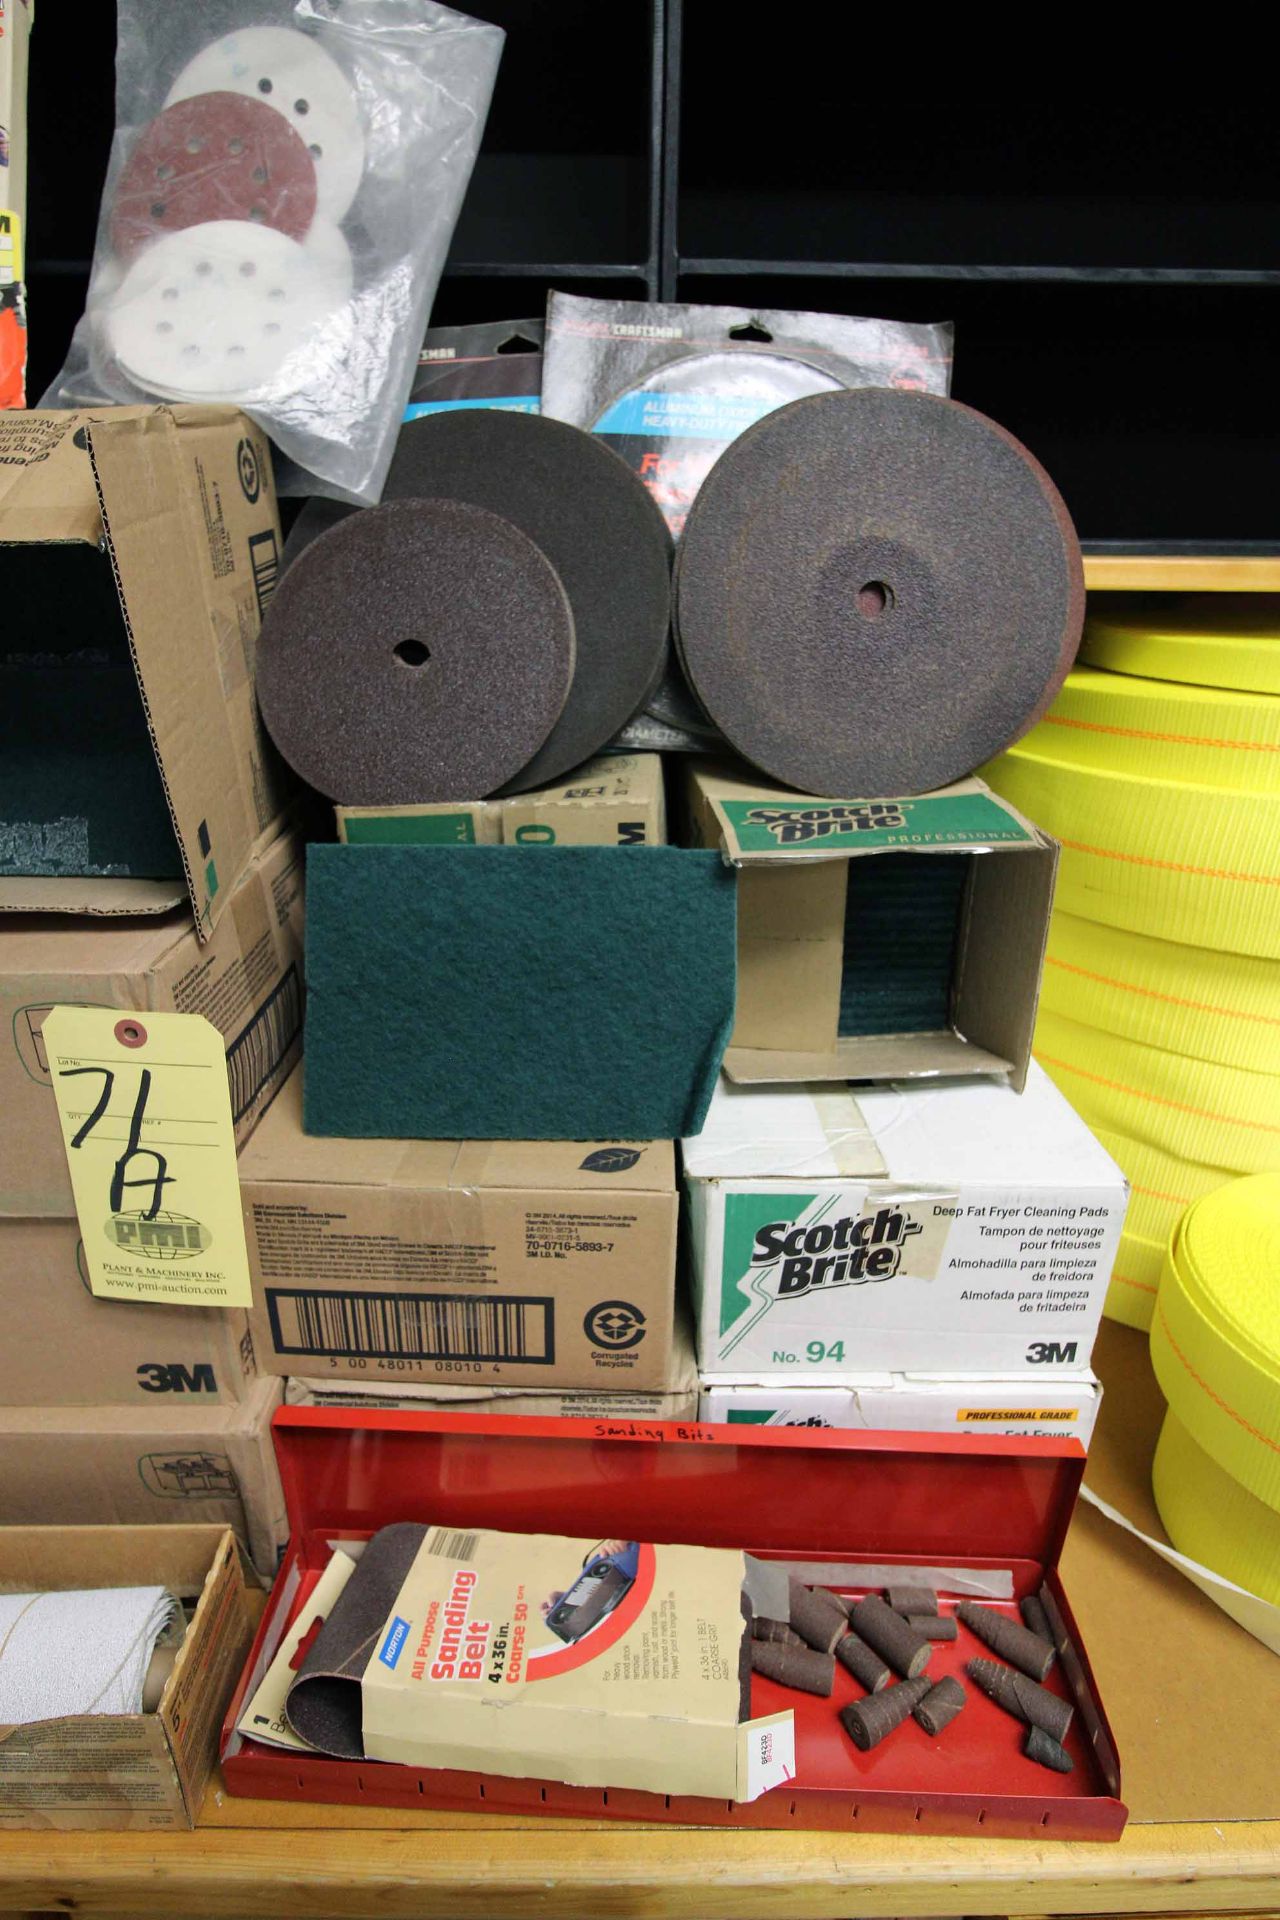 LOT CONSISTING OF: sanding discs, Scotch Brite polishing pads, sanding belts (Located at: Offshore - Image 2 of 4